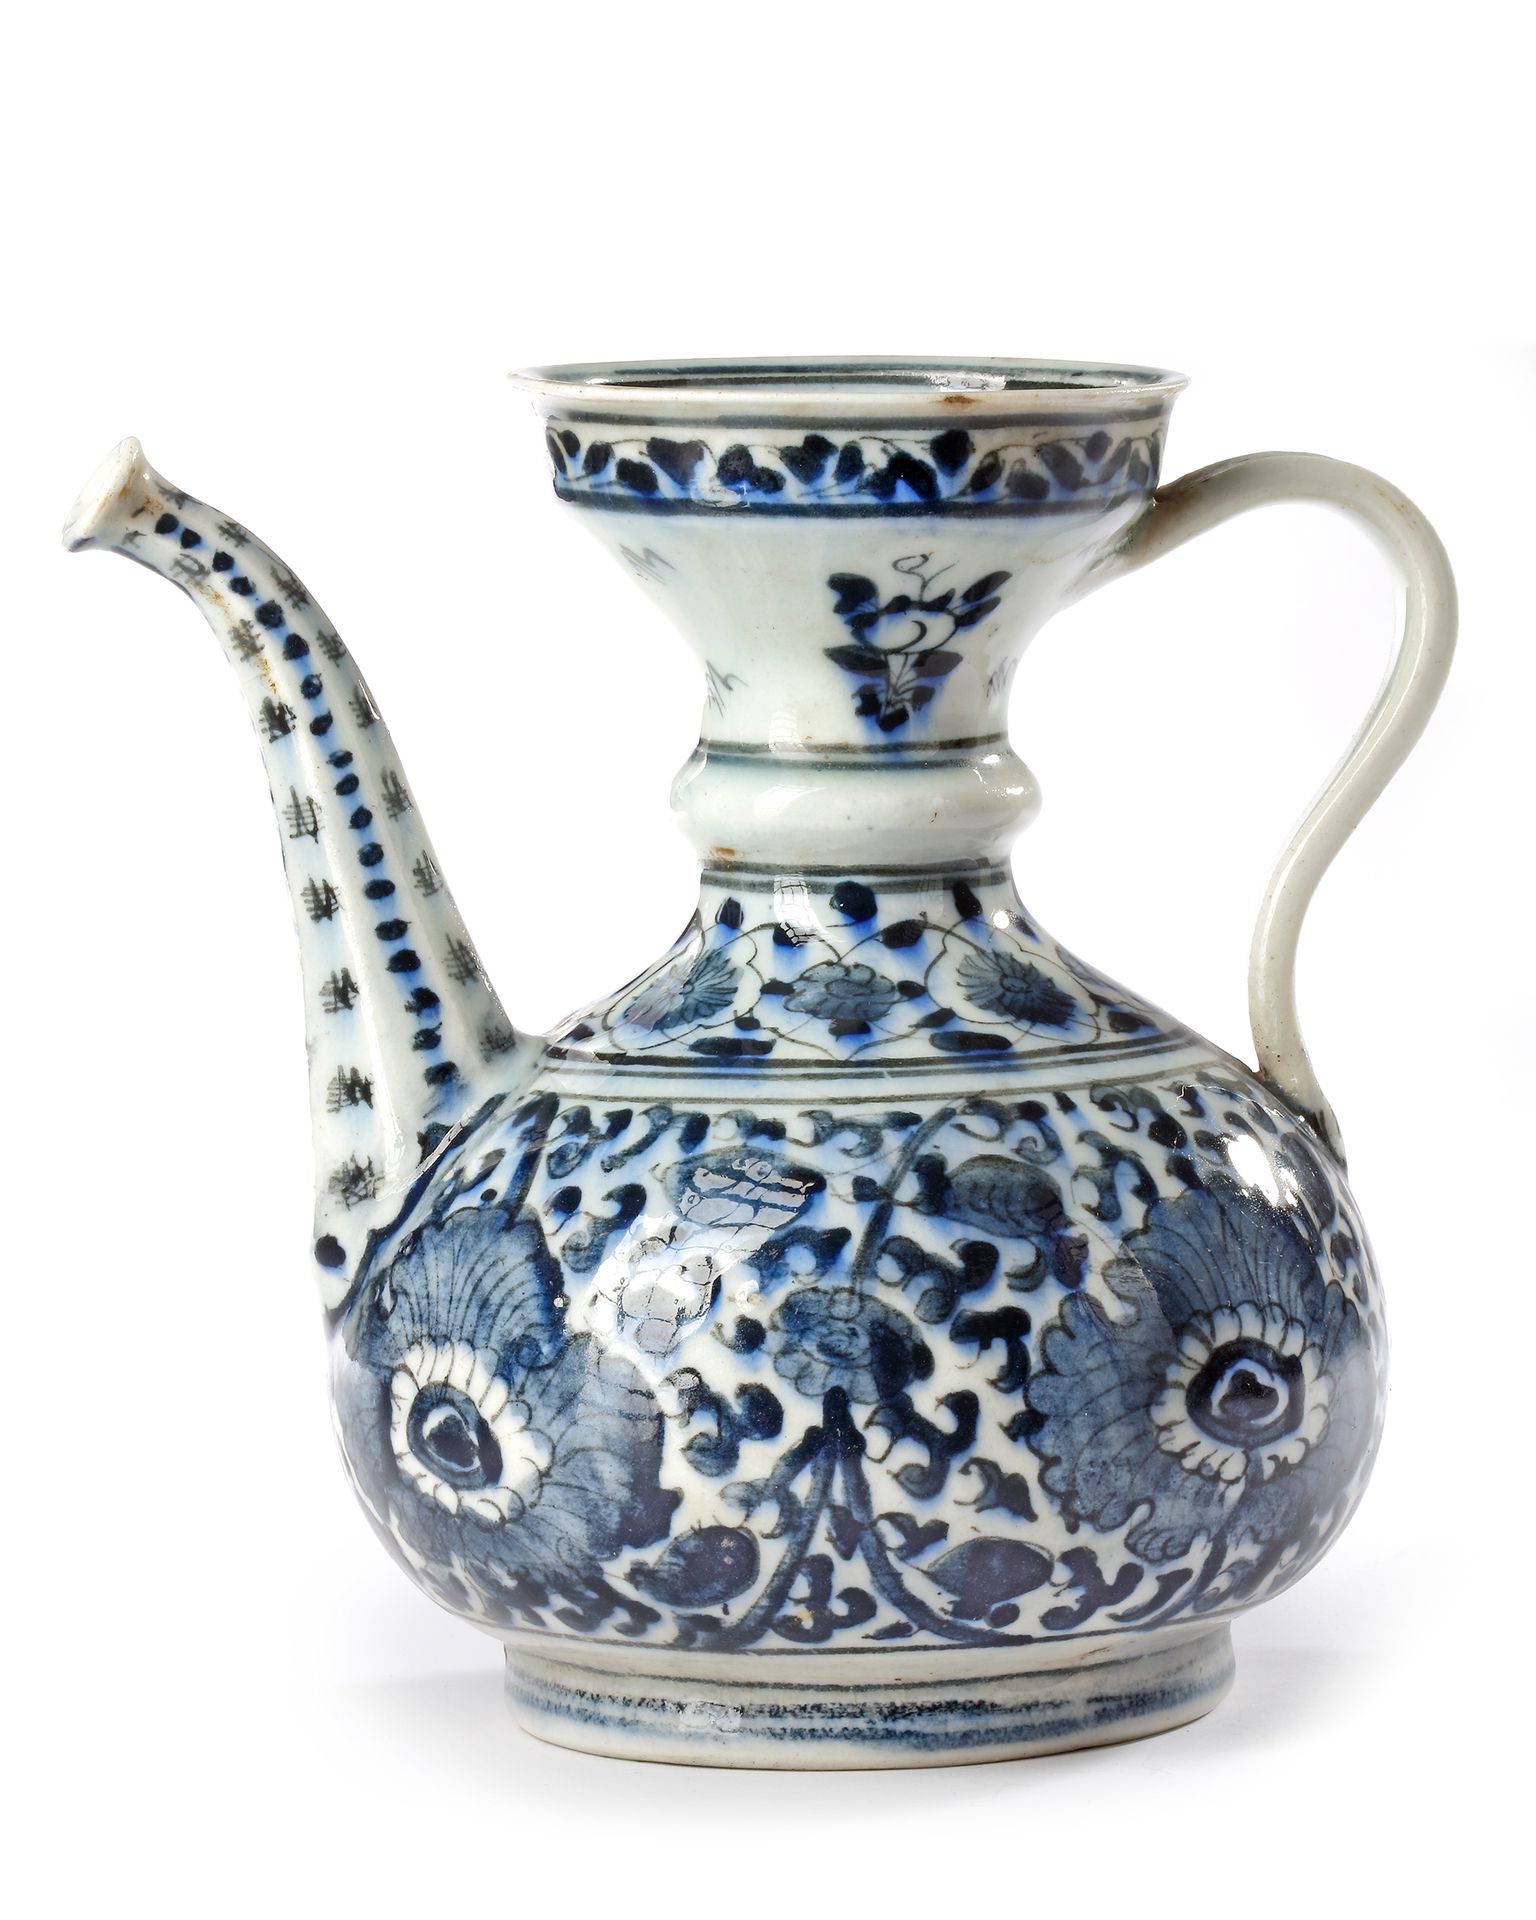 A SAFAVID BLUE, BLACK AND WHITE EWER, PERSIA, 18TH CENTURY Kugelige Form mit dün&hellip;